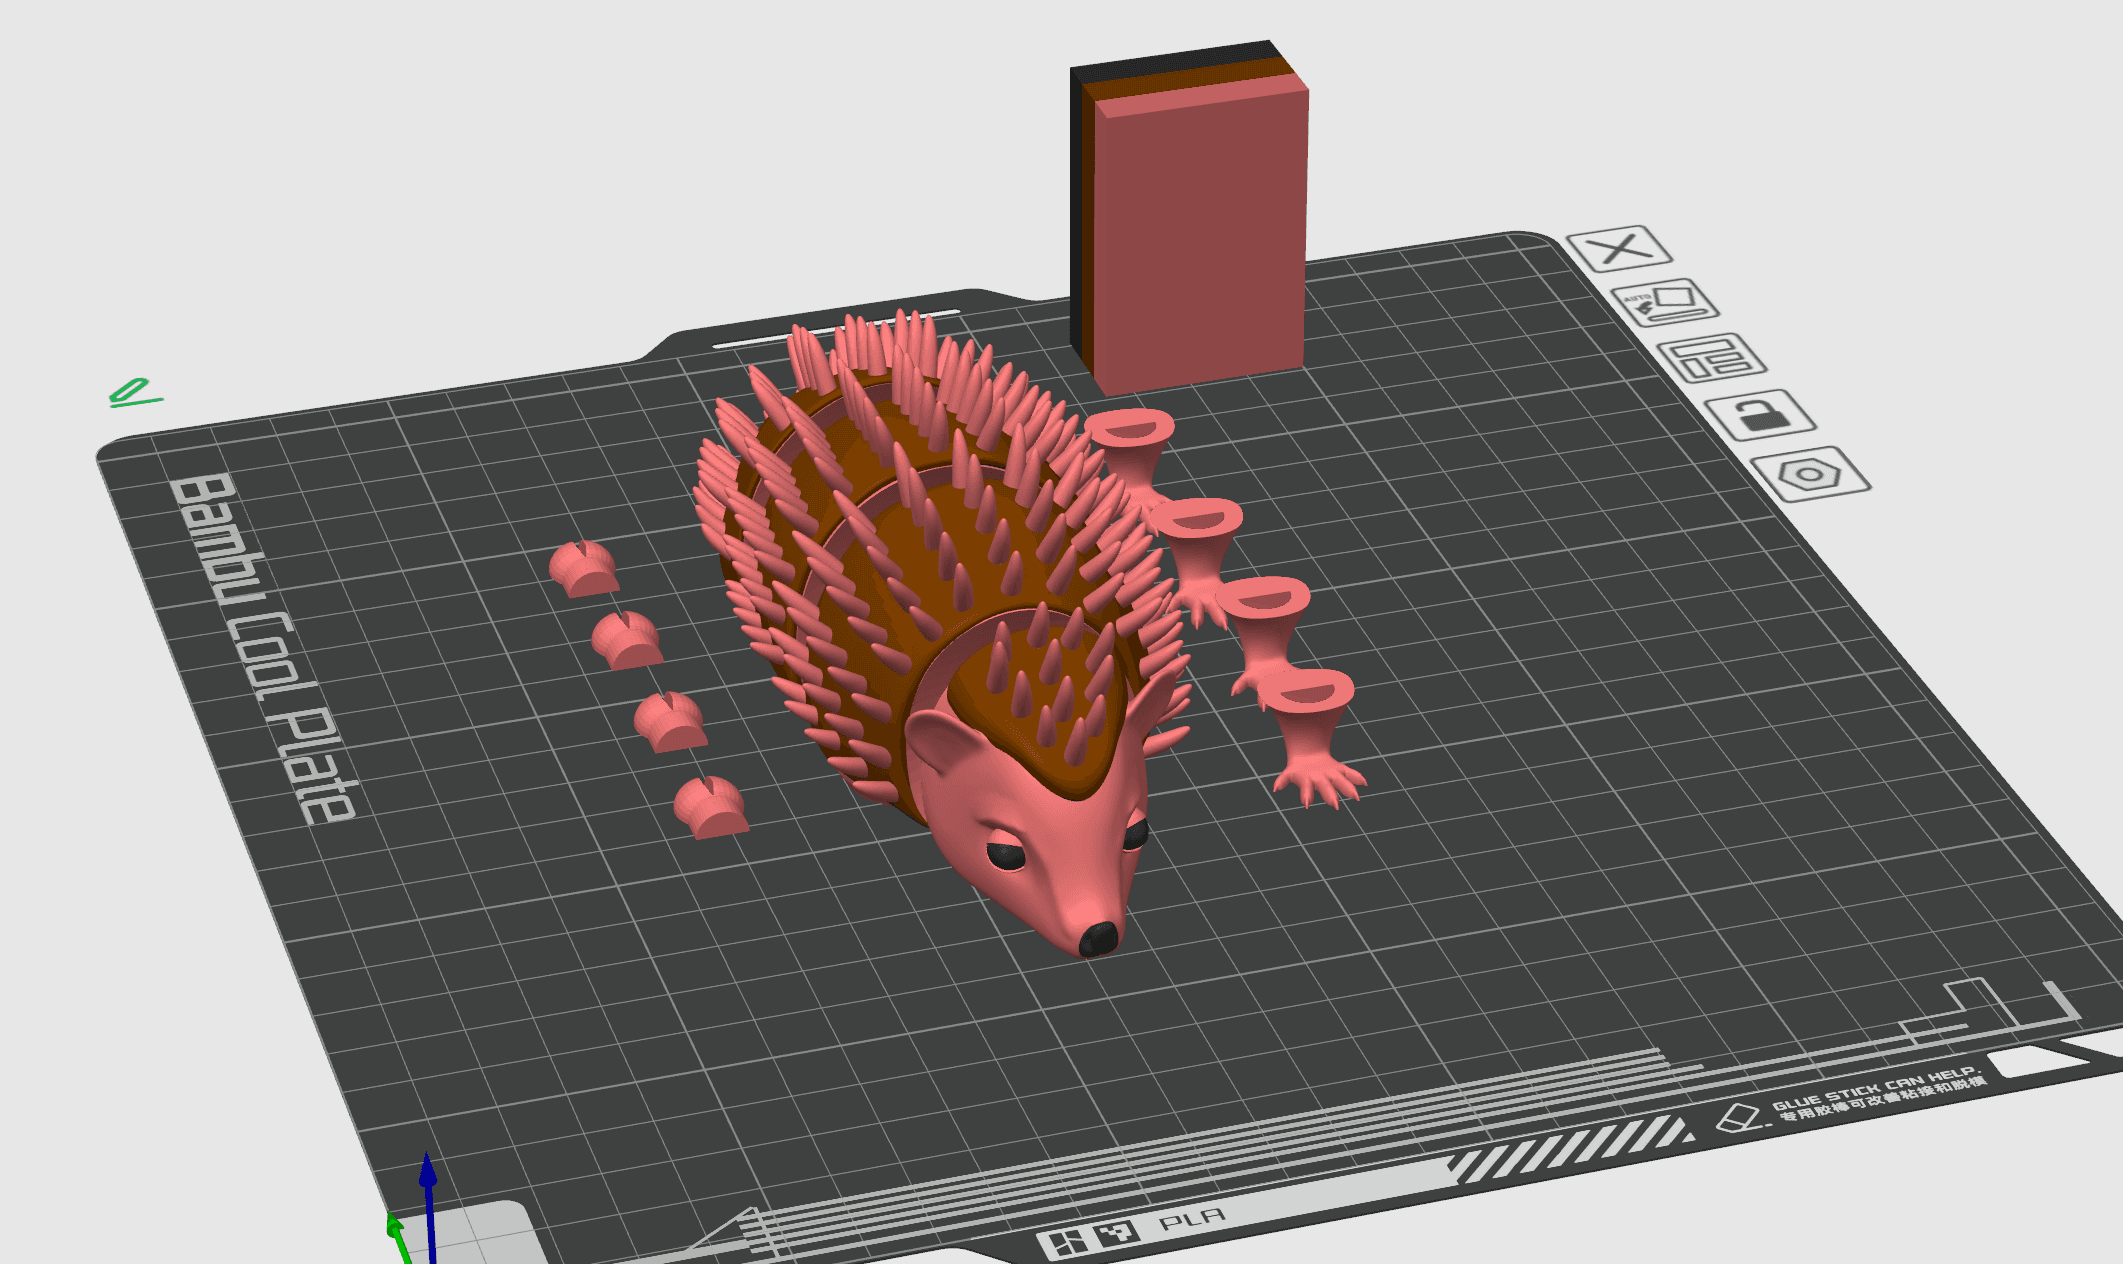 Cute hedgehog  (articulated) print-in-place multicolor LEVERTOYS 3d model